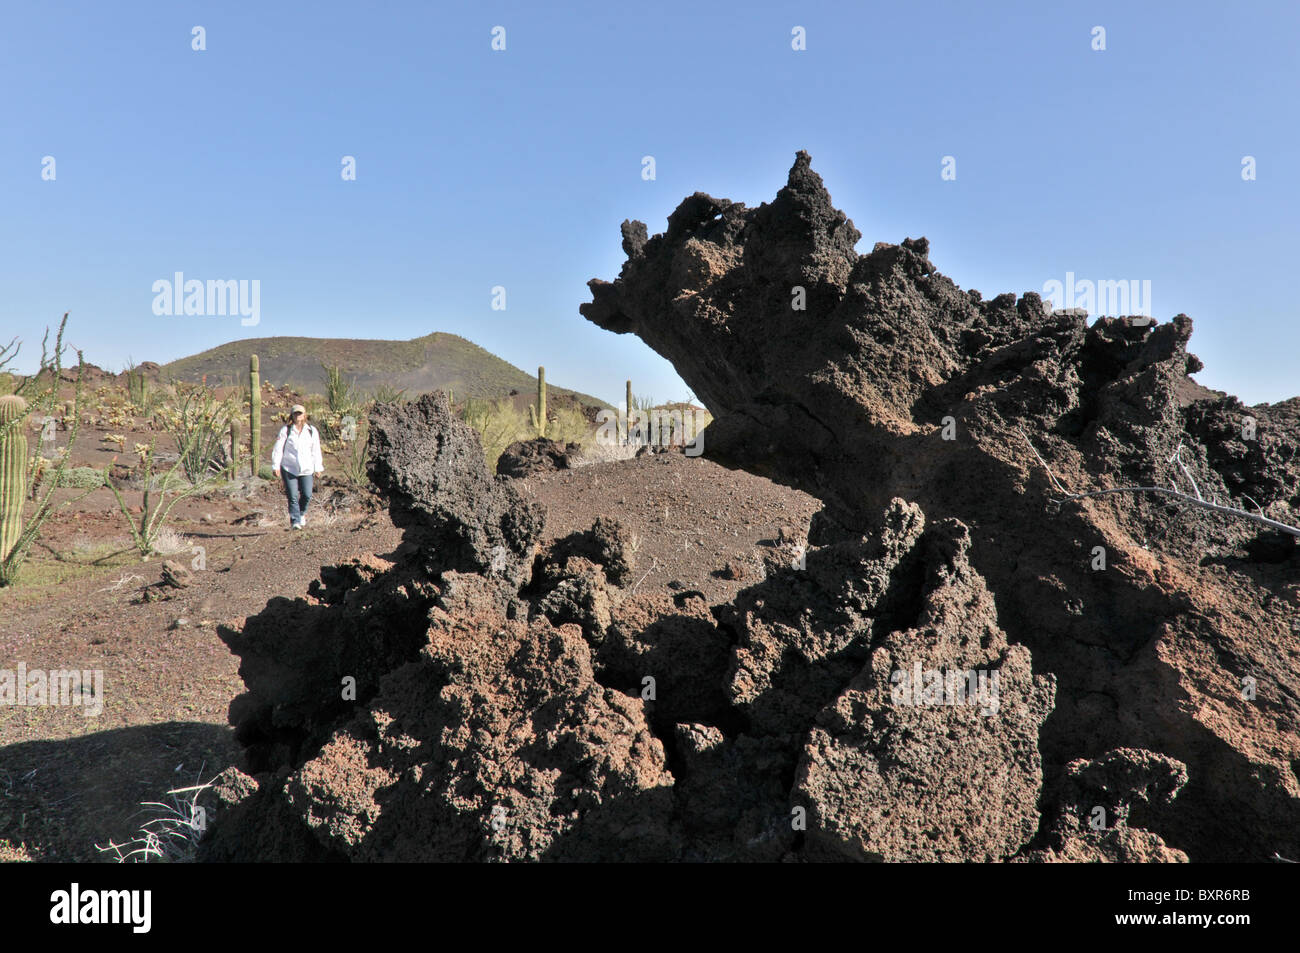 Rough shaped lava in El Pinacate Biosphere Reserve, Sonora, Mexico Stock Photo